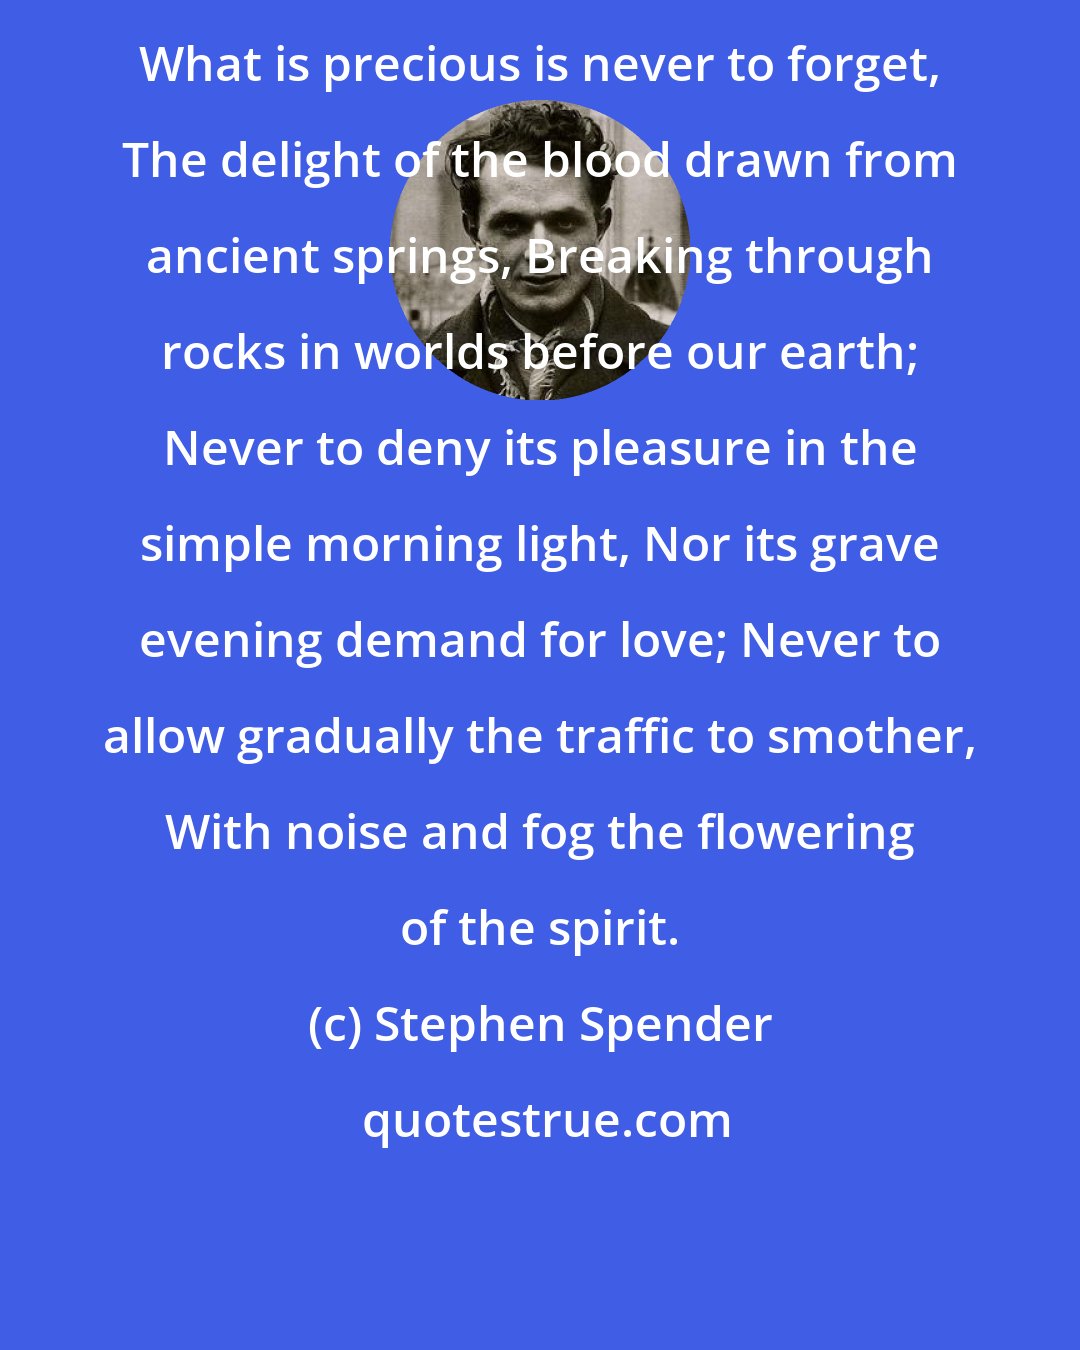 Stephen Spender: What is precious is never to forget, The delight of the blood drawn from ancient springs, Breaking through rocks in worlds before our earth; Never to deny its pleasure in the simple morning light, Nor its grave evening demand for love; Never to allow gradually the traffic to smother, With noise and fog the flowering of the spirit.